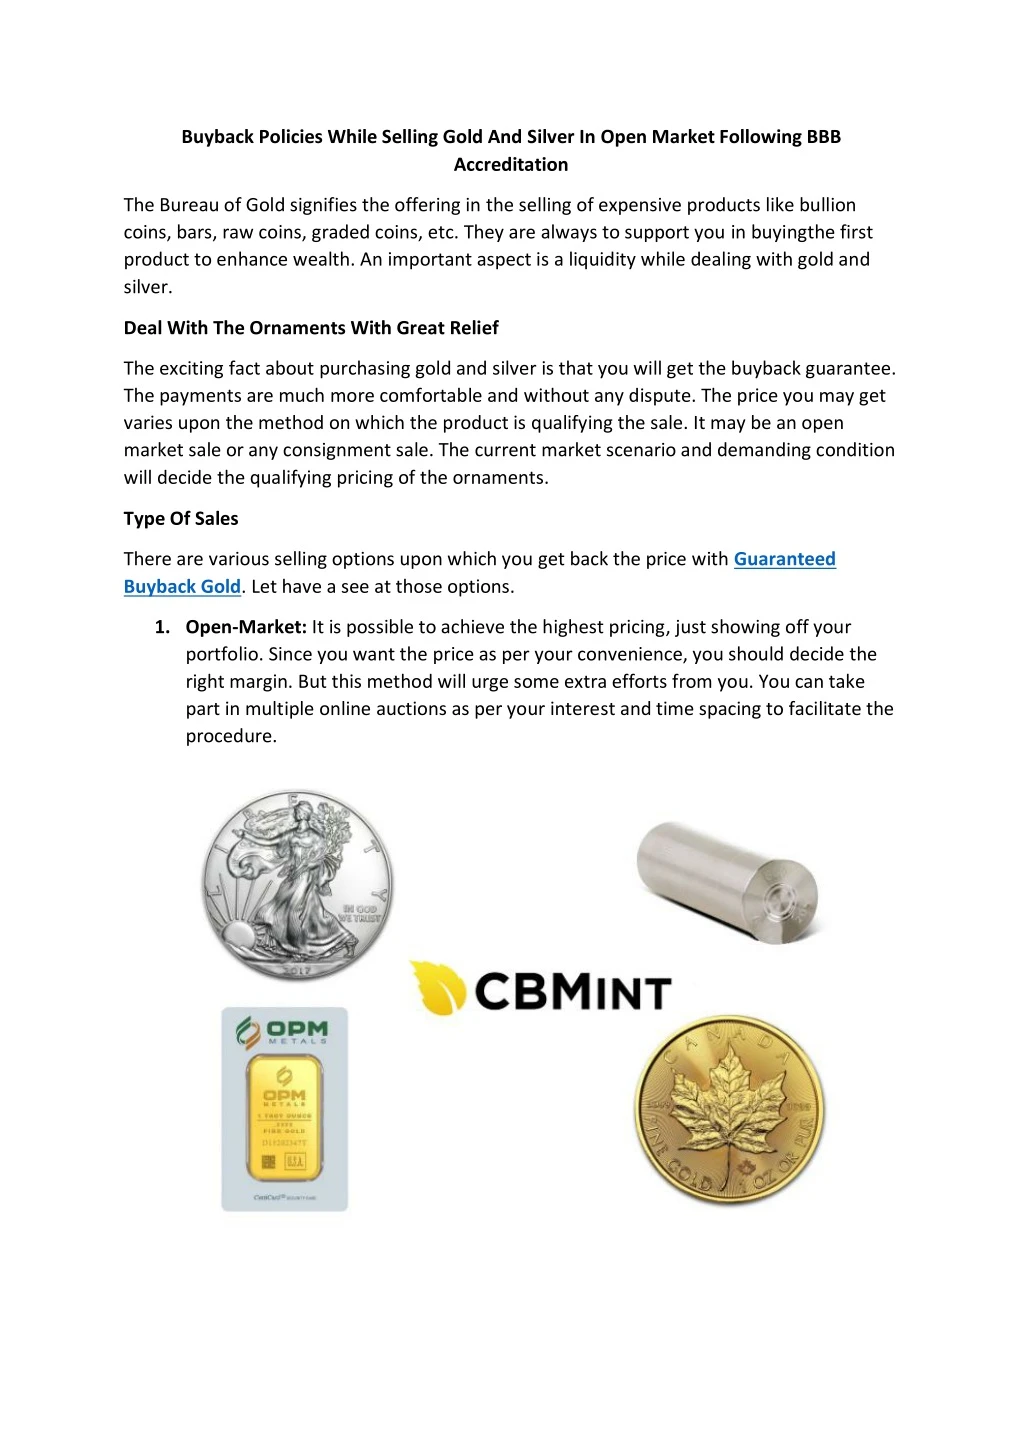 buyback policies while selling gold and silver